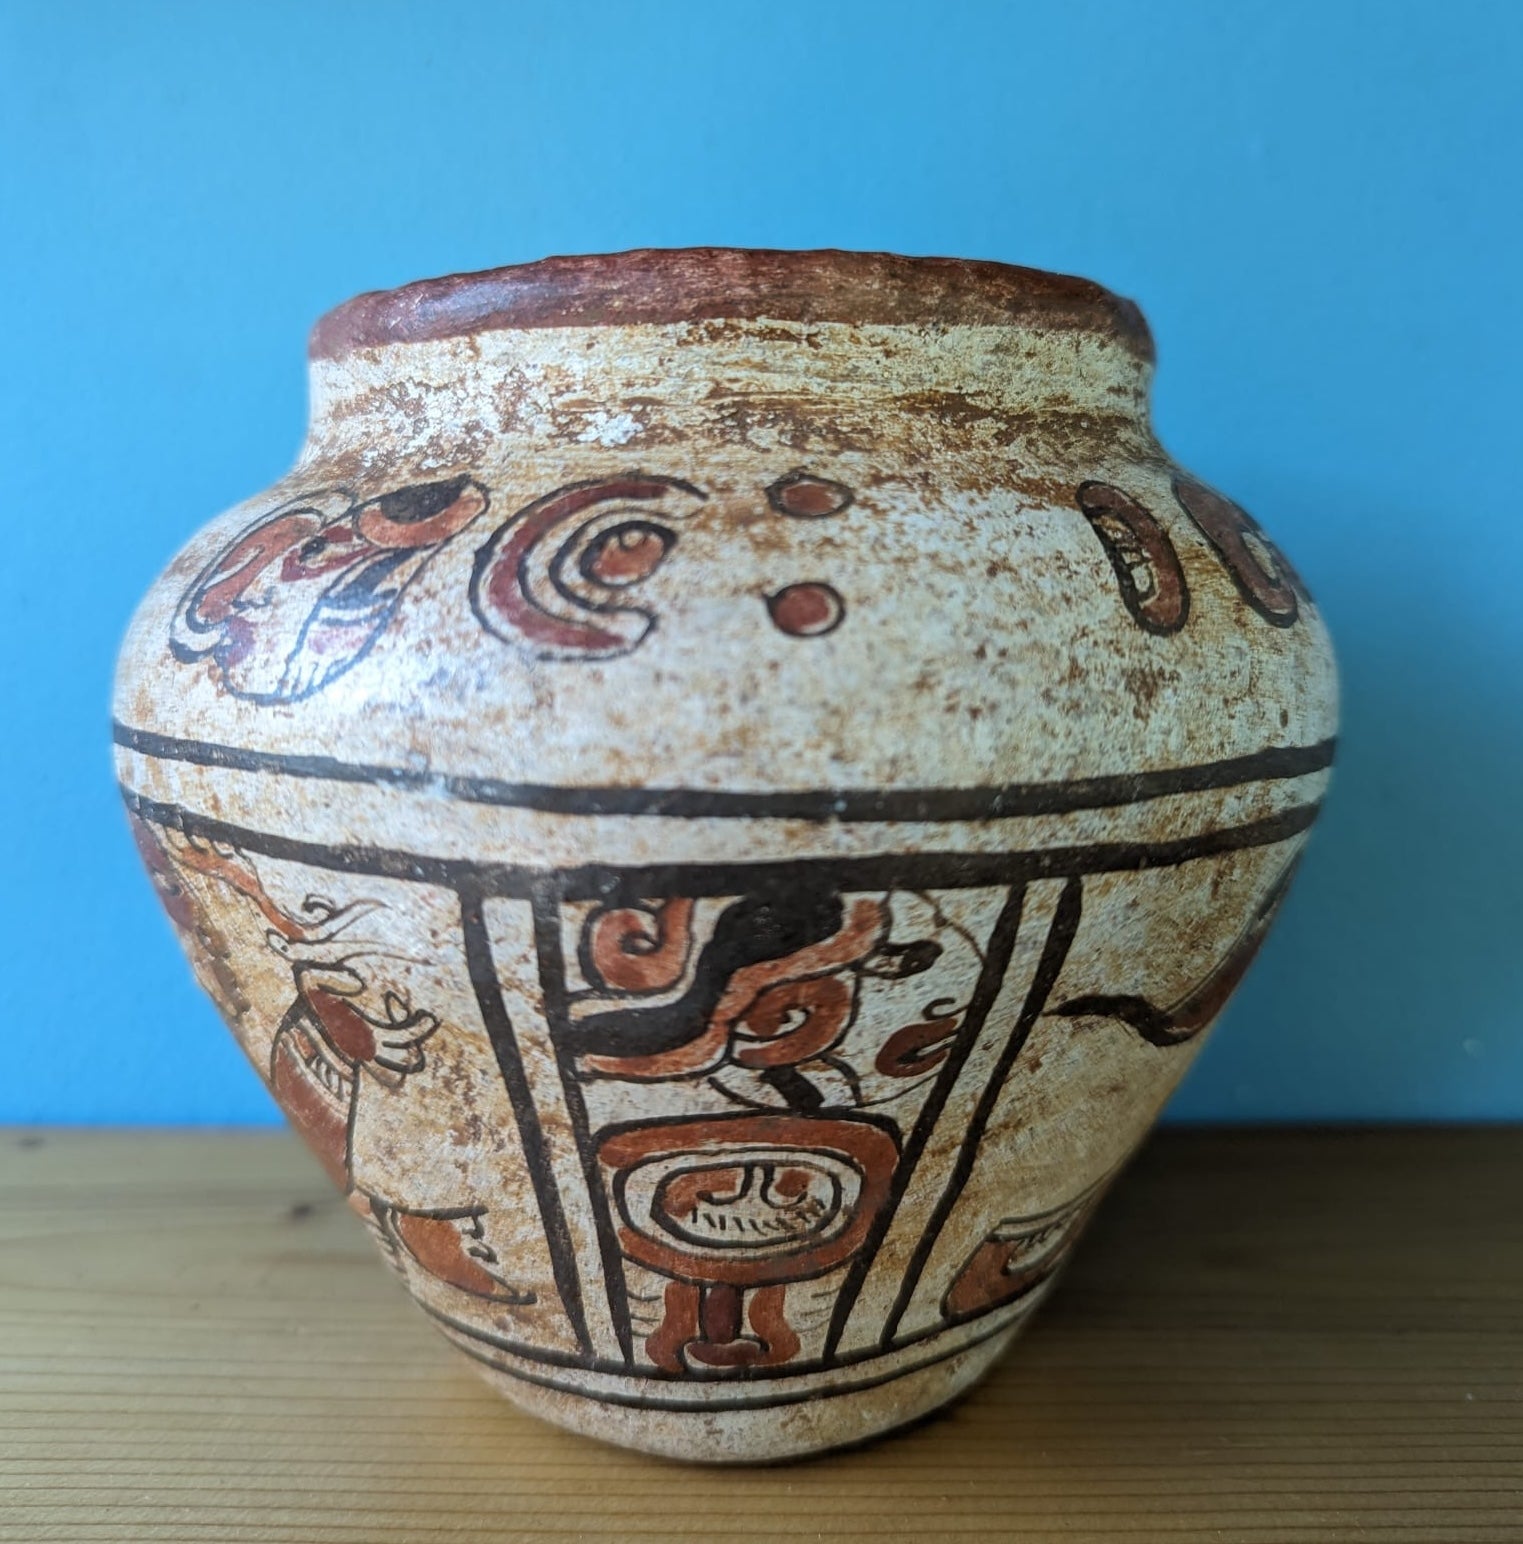 Anna Lee Dozier purchased a priceless ancient Mayan artifact, pictured, at a Maryland thrift store for less than $5.